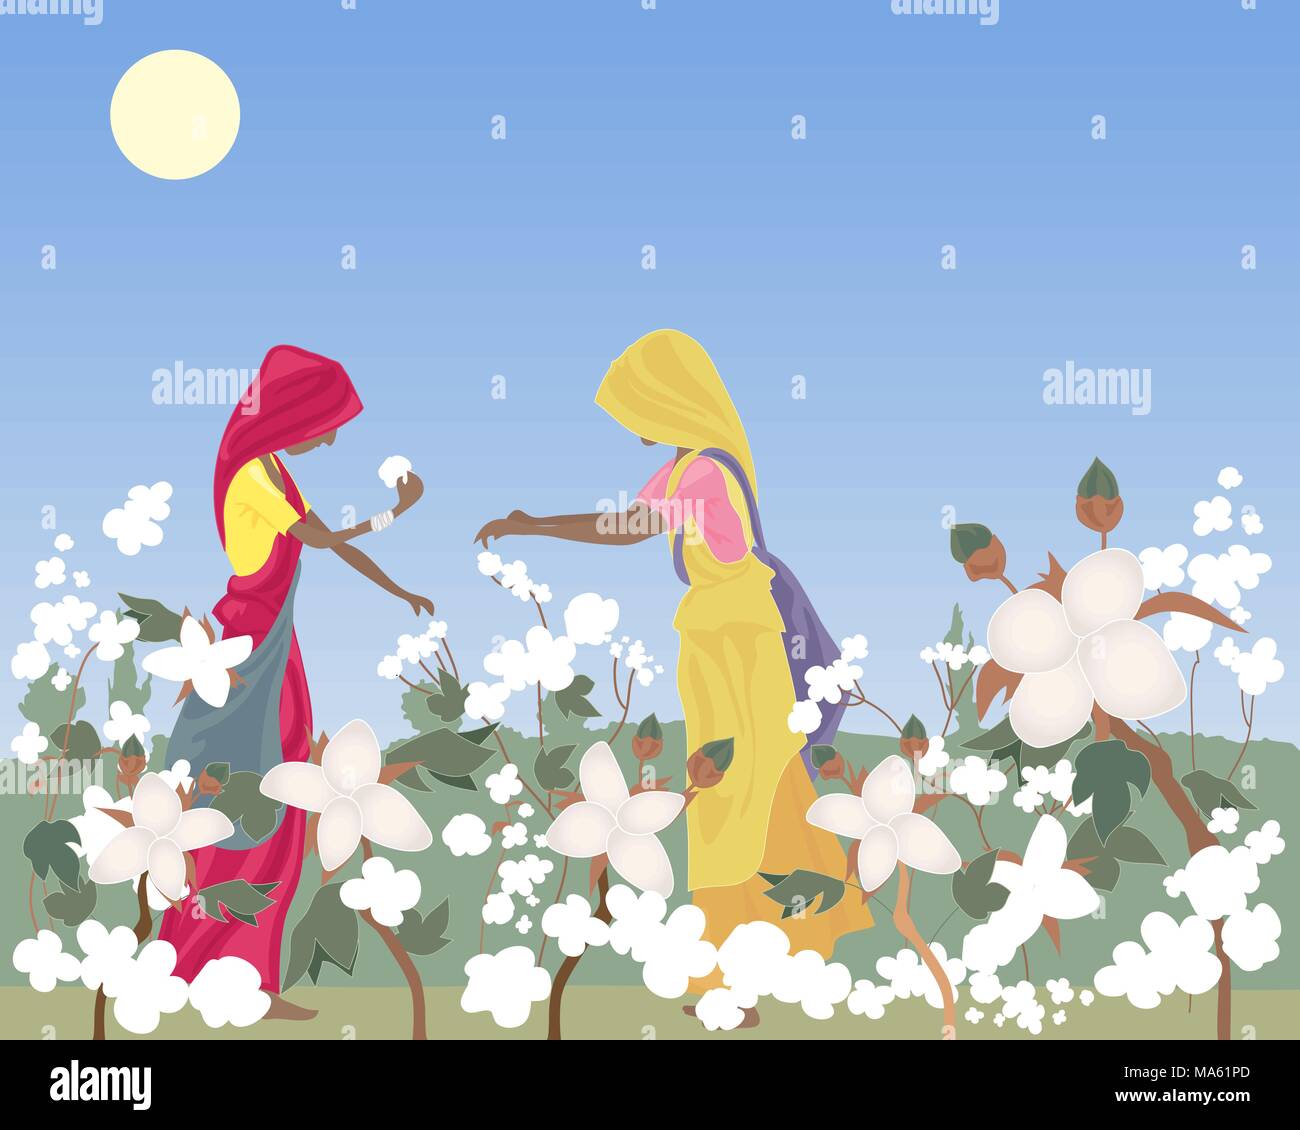 a vector illustration in eps 10 format of two traditionally dressed women laborers in India picking cotton in a field under a hot sun and blue sky Stock Vector